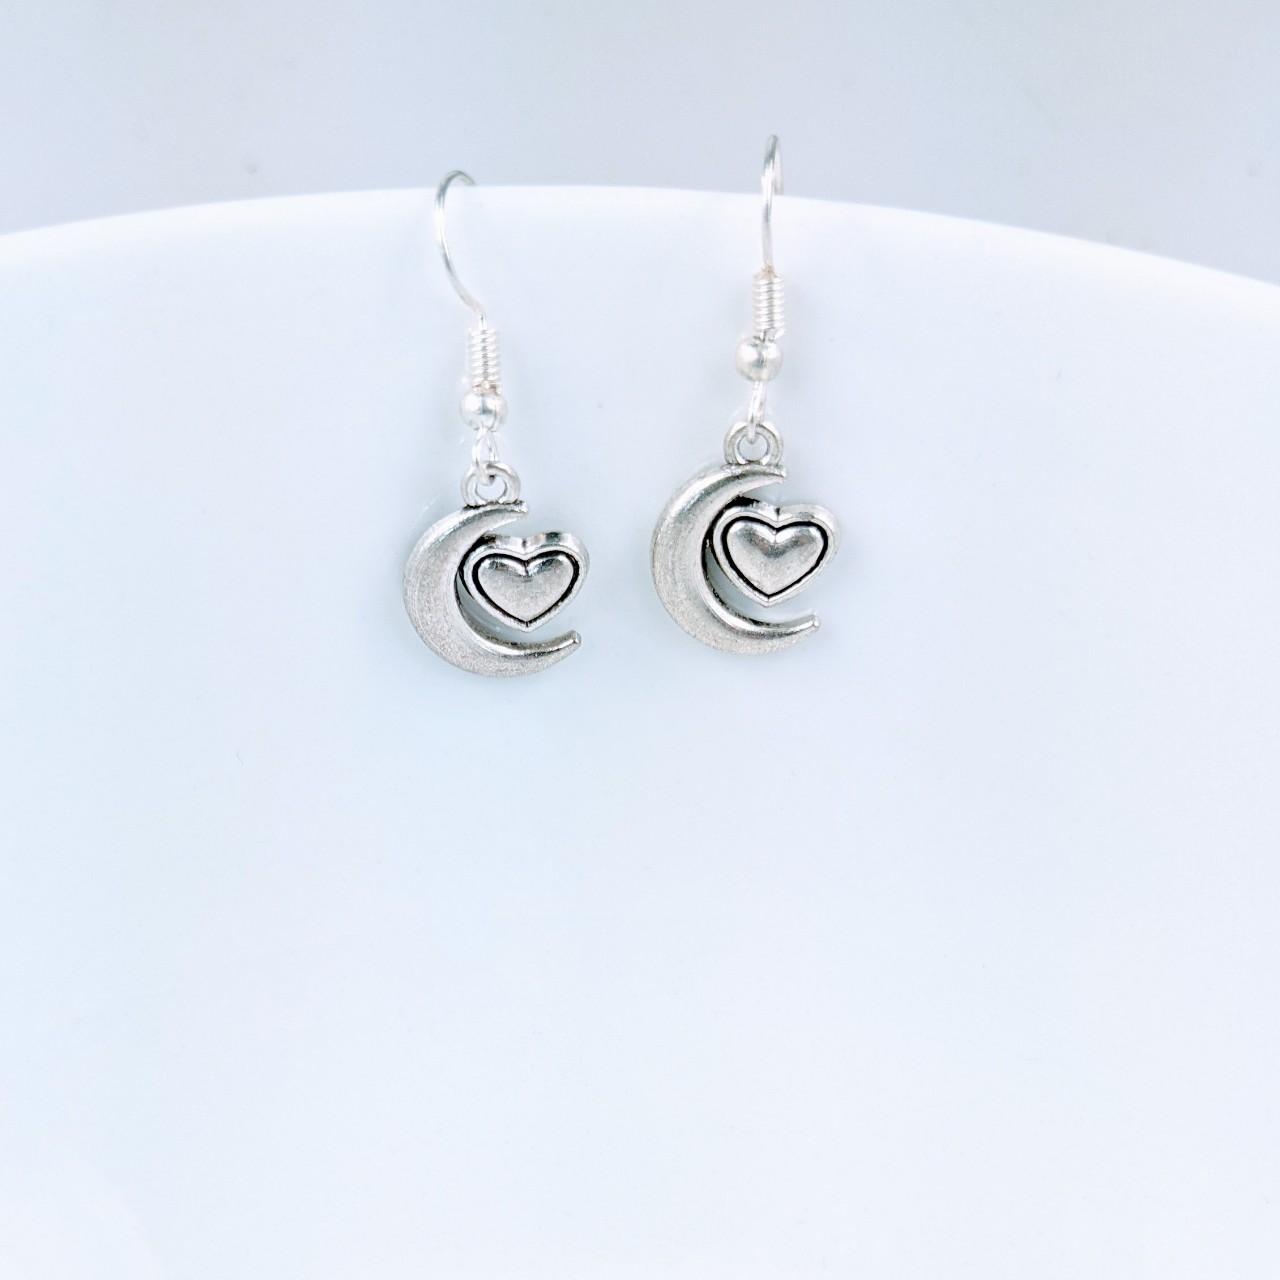 Product Image 2 - Moon Heart Earrings
Brand new. 

Made